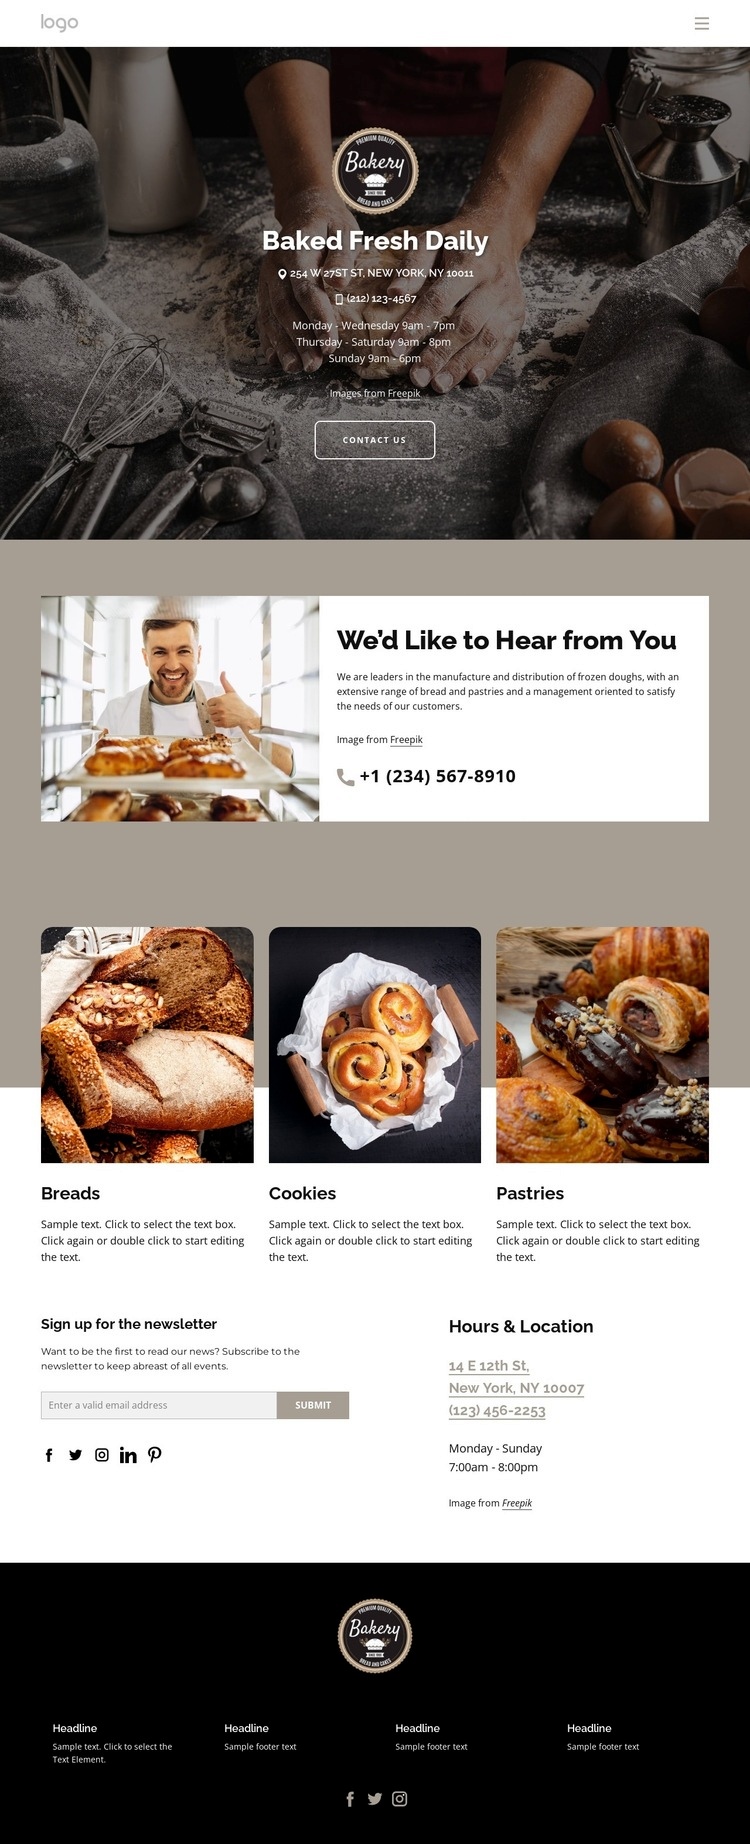 Baked fresh bread daily Web Page Design